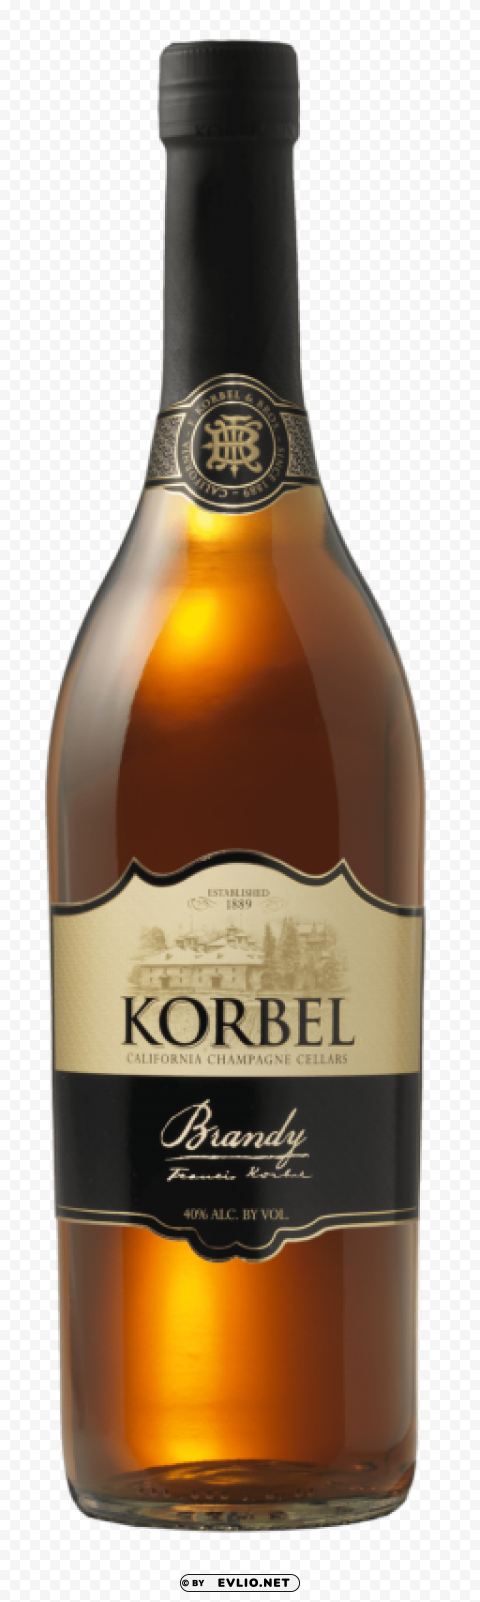 Korbel Bottle PNG Graphic Isolated With Transparency